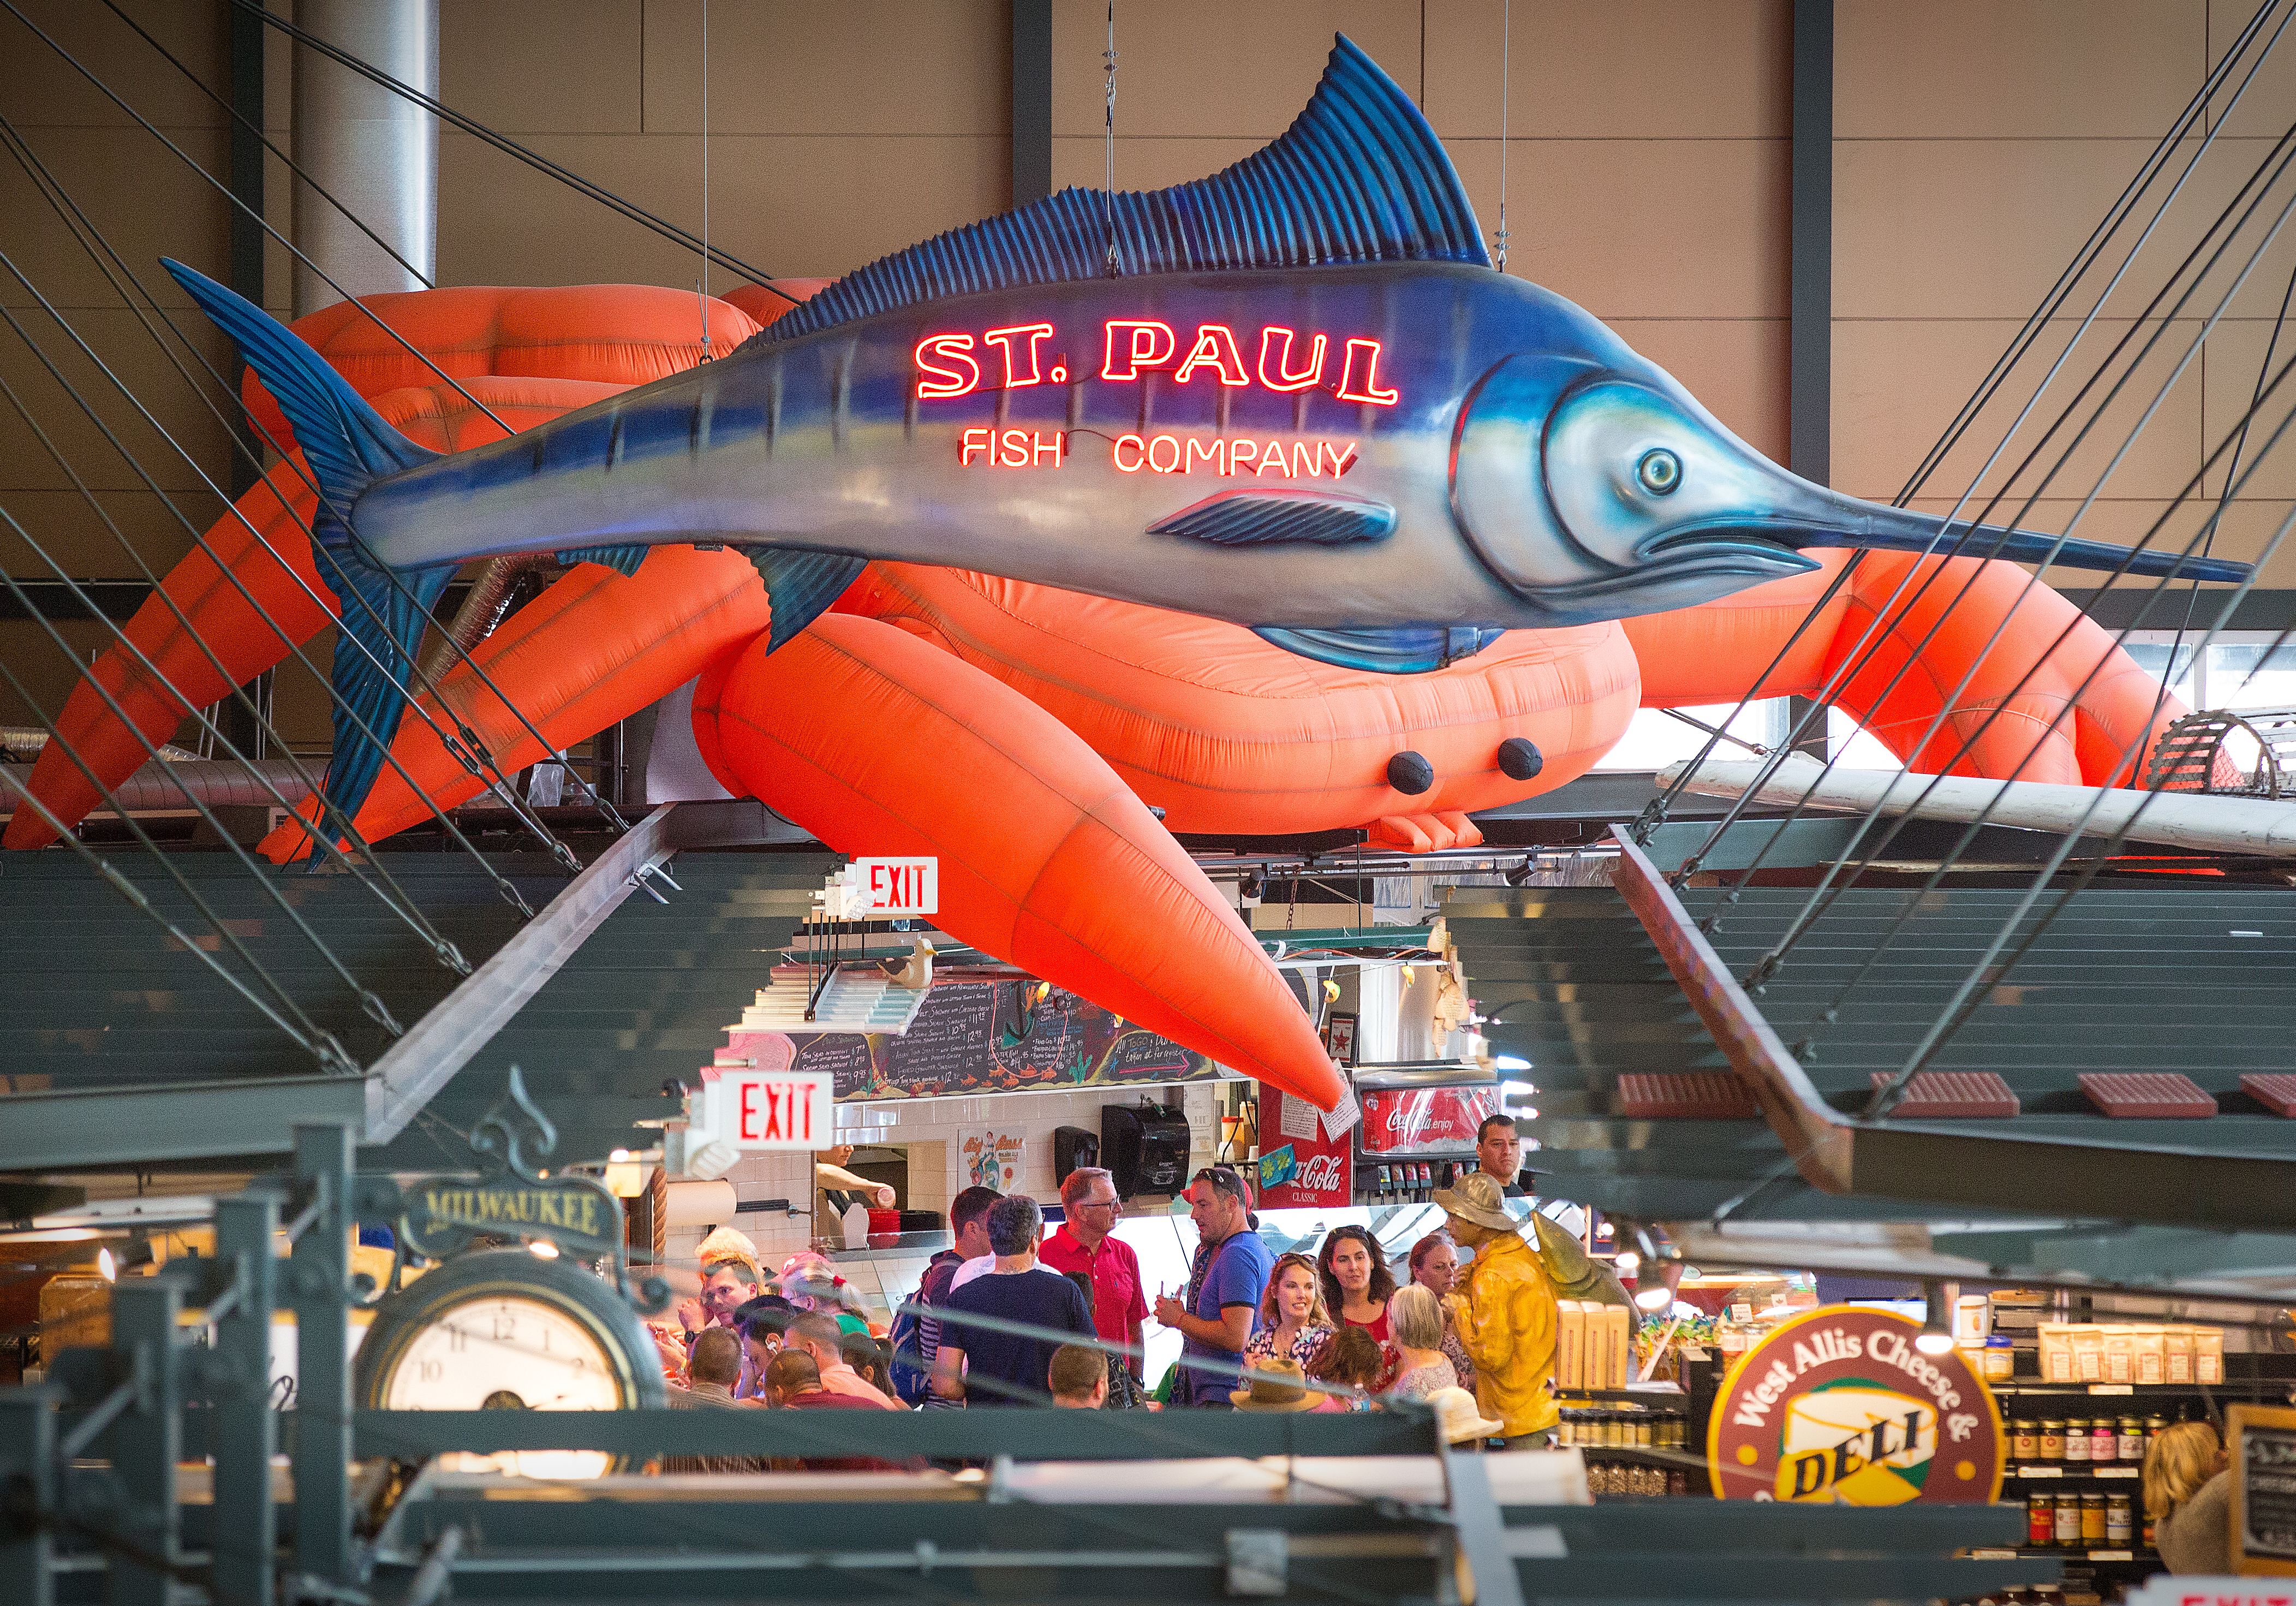 St. Paul Fish Company, complete with Oyster bar and restaurant, sells fresh seafood at the Milwaukee Public Market